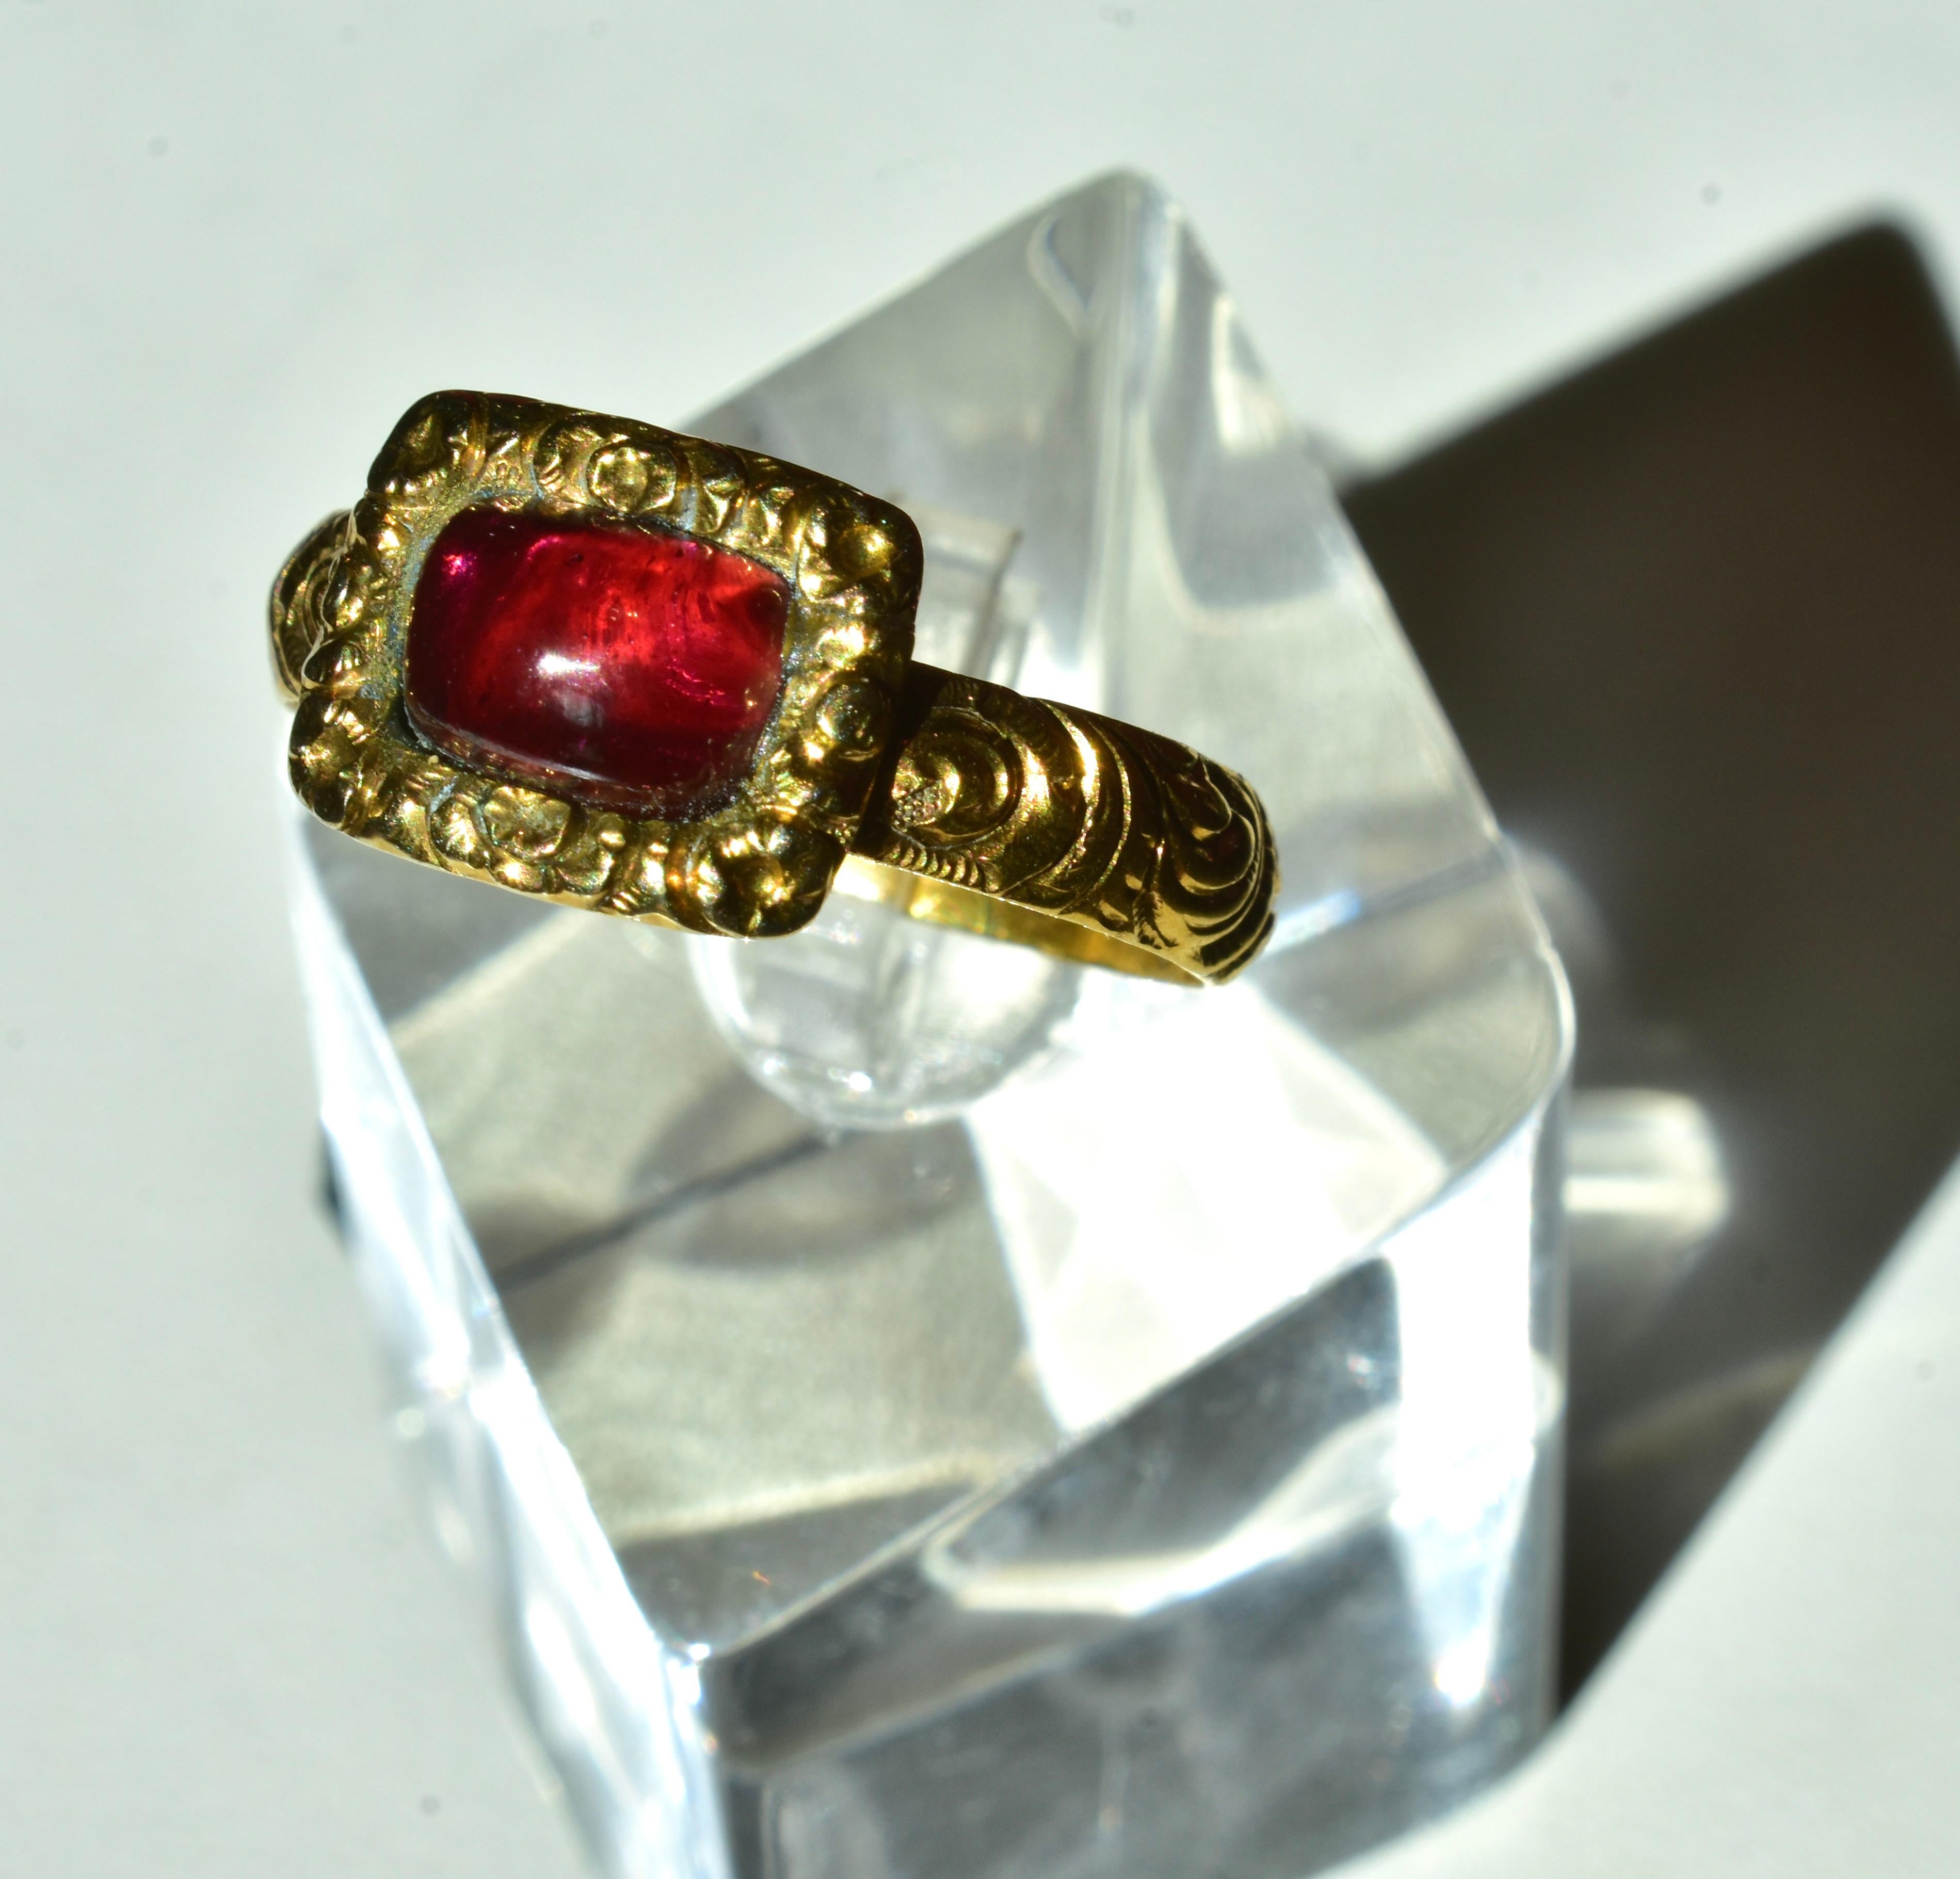 Women's or Men's Antique 18K and Garnet Ring,  Inscribed and dated 1712-1765.